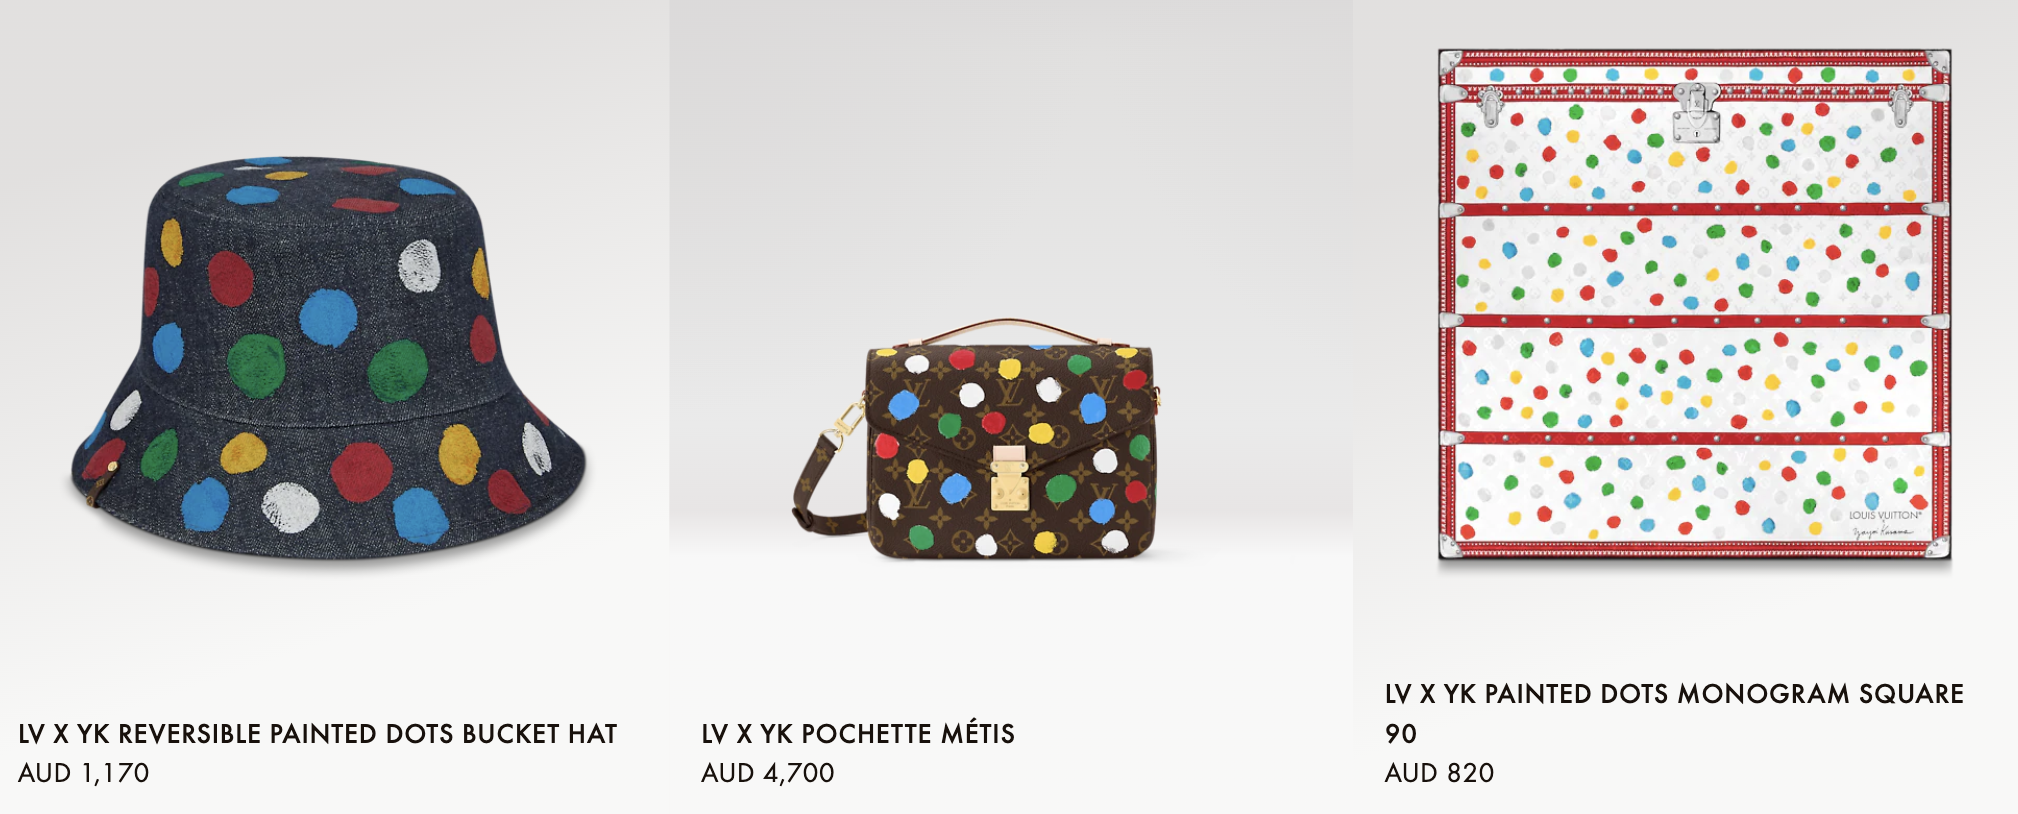 Louis Vuitton Reminisces on Collaborations With Yayoi Kusama for